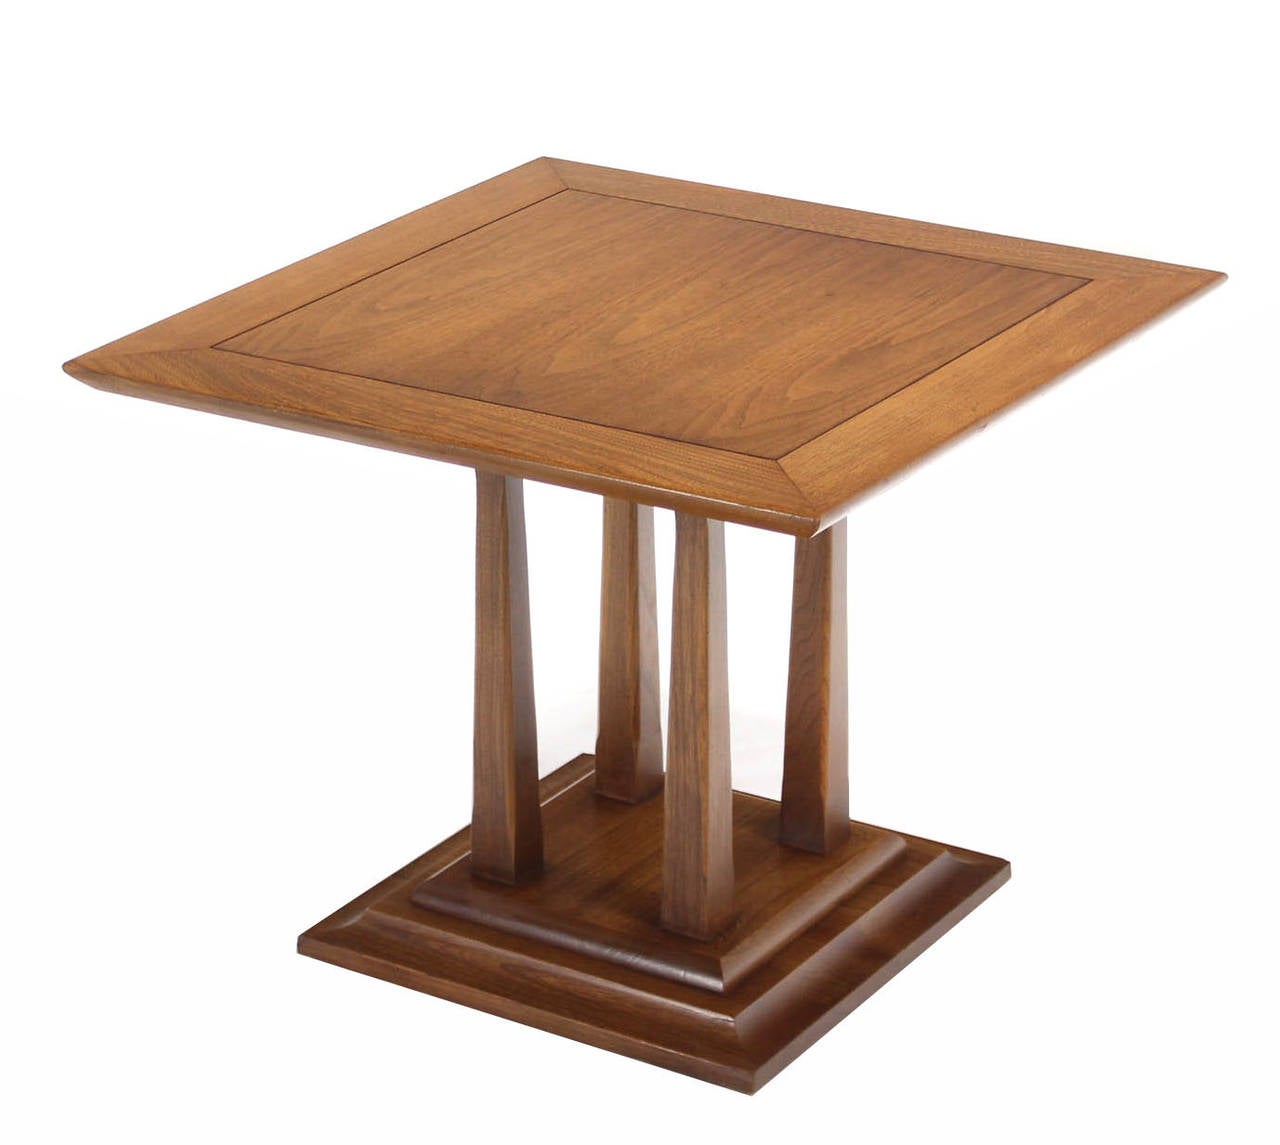 Pair of nice design walnut end tables.